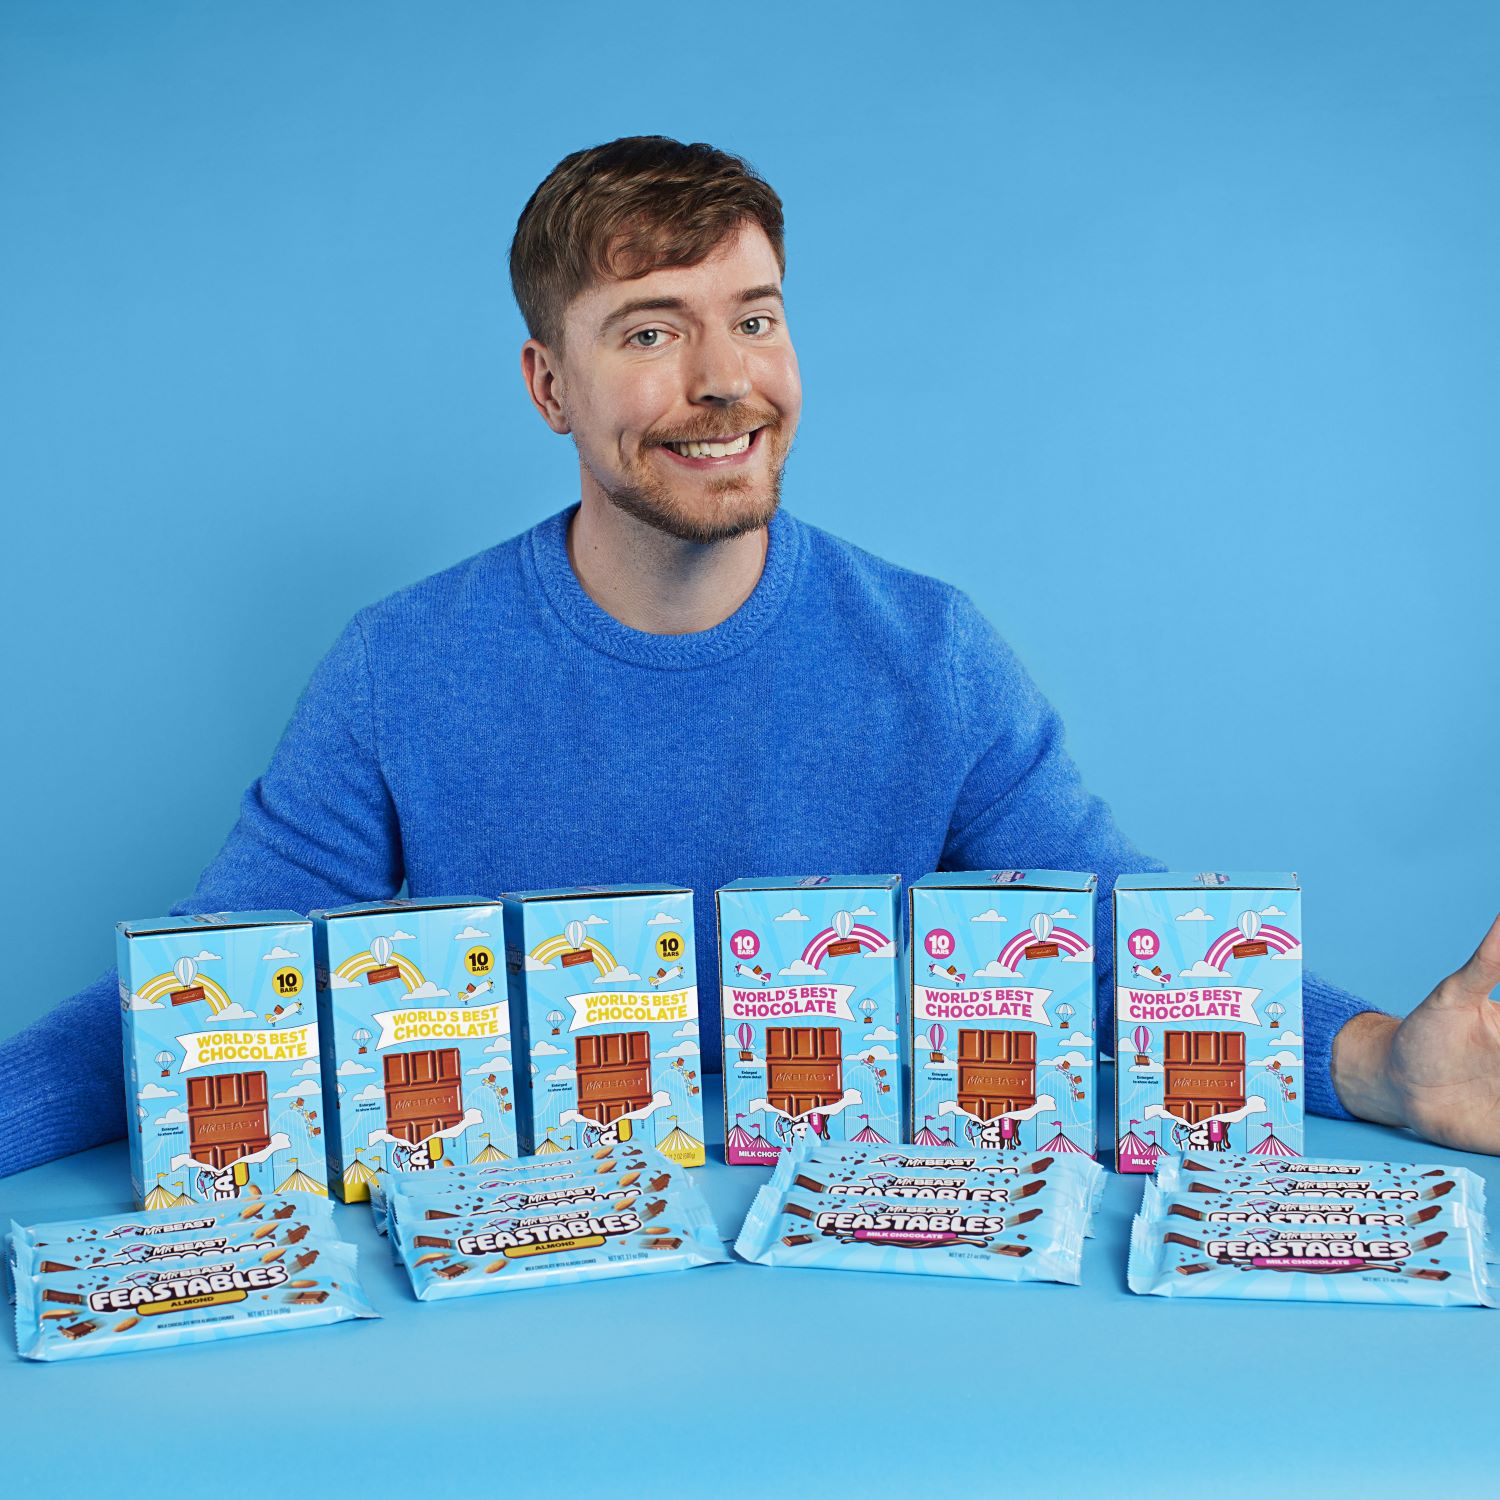 Jimmy Mr Beast with Feastables range